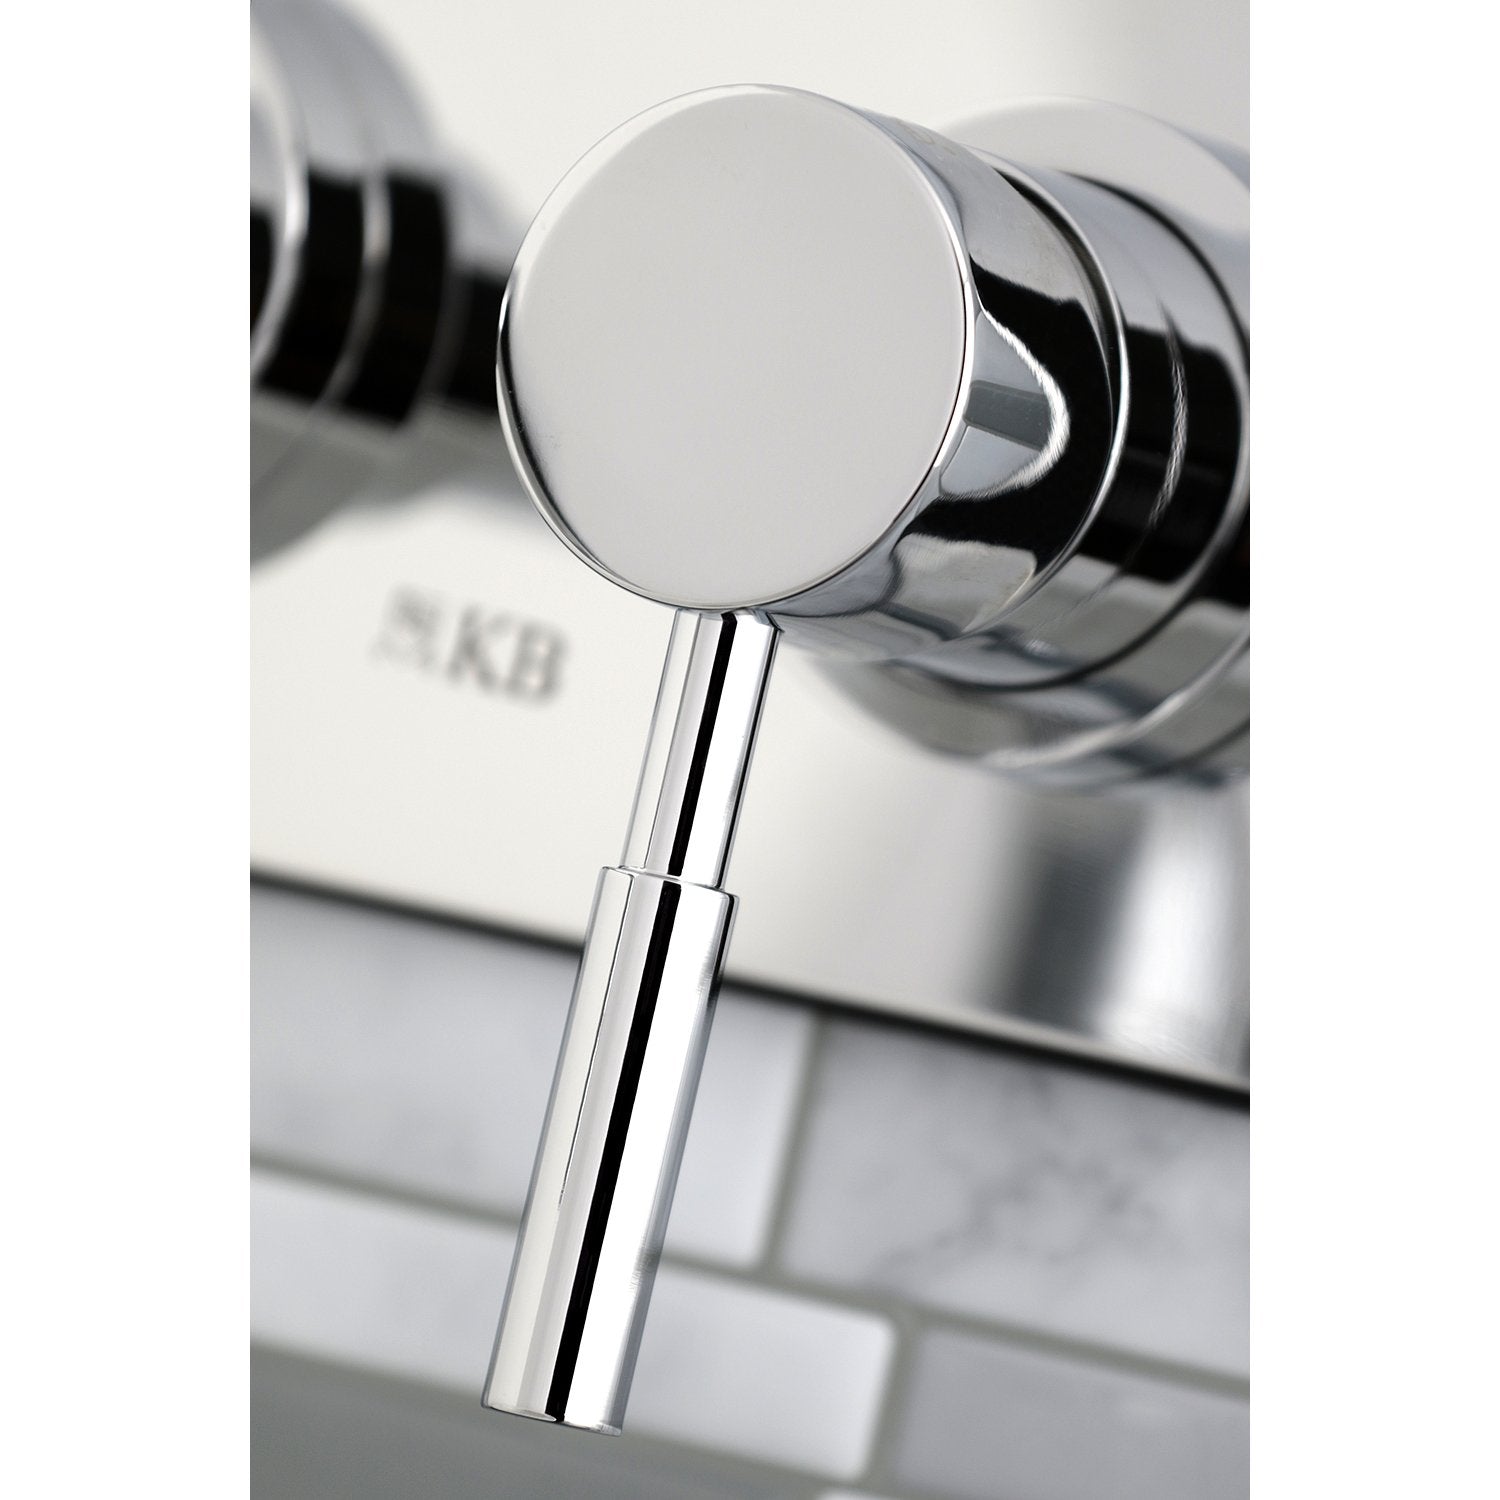 Kingston Brass Concord Single Lever Handle Wall Mount Bathroom Faucet